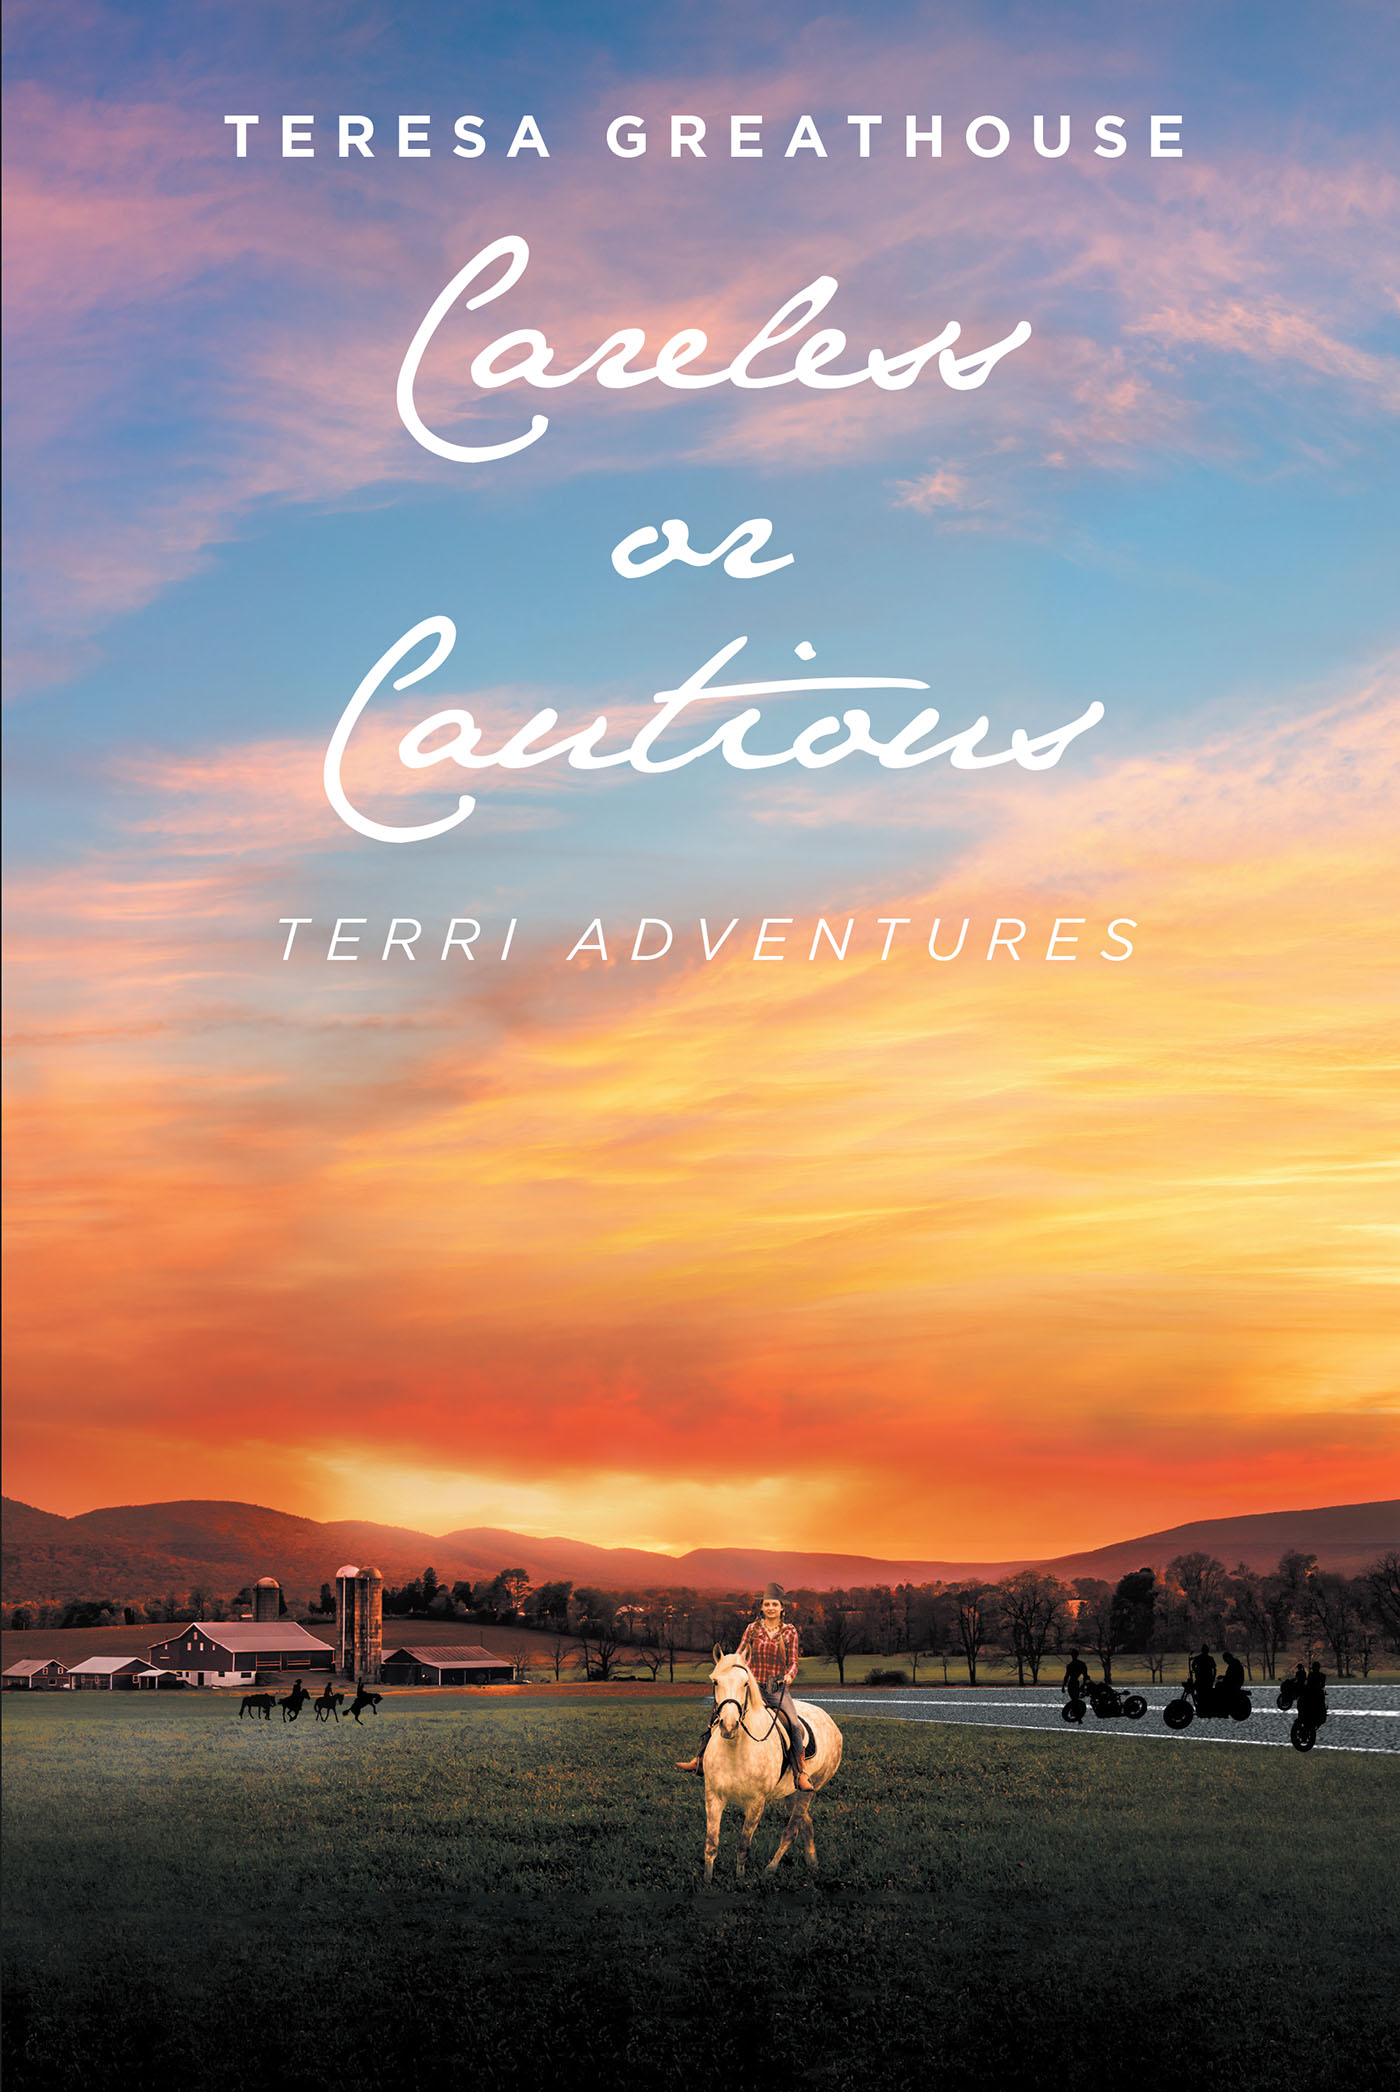 Teresa Greathouse’s New Book, "Careless or Cautious: Terri Adventures," is a Captivating Tale That Follows One Woman's Bravery as She Navigates the Highs and Lows of Life